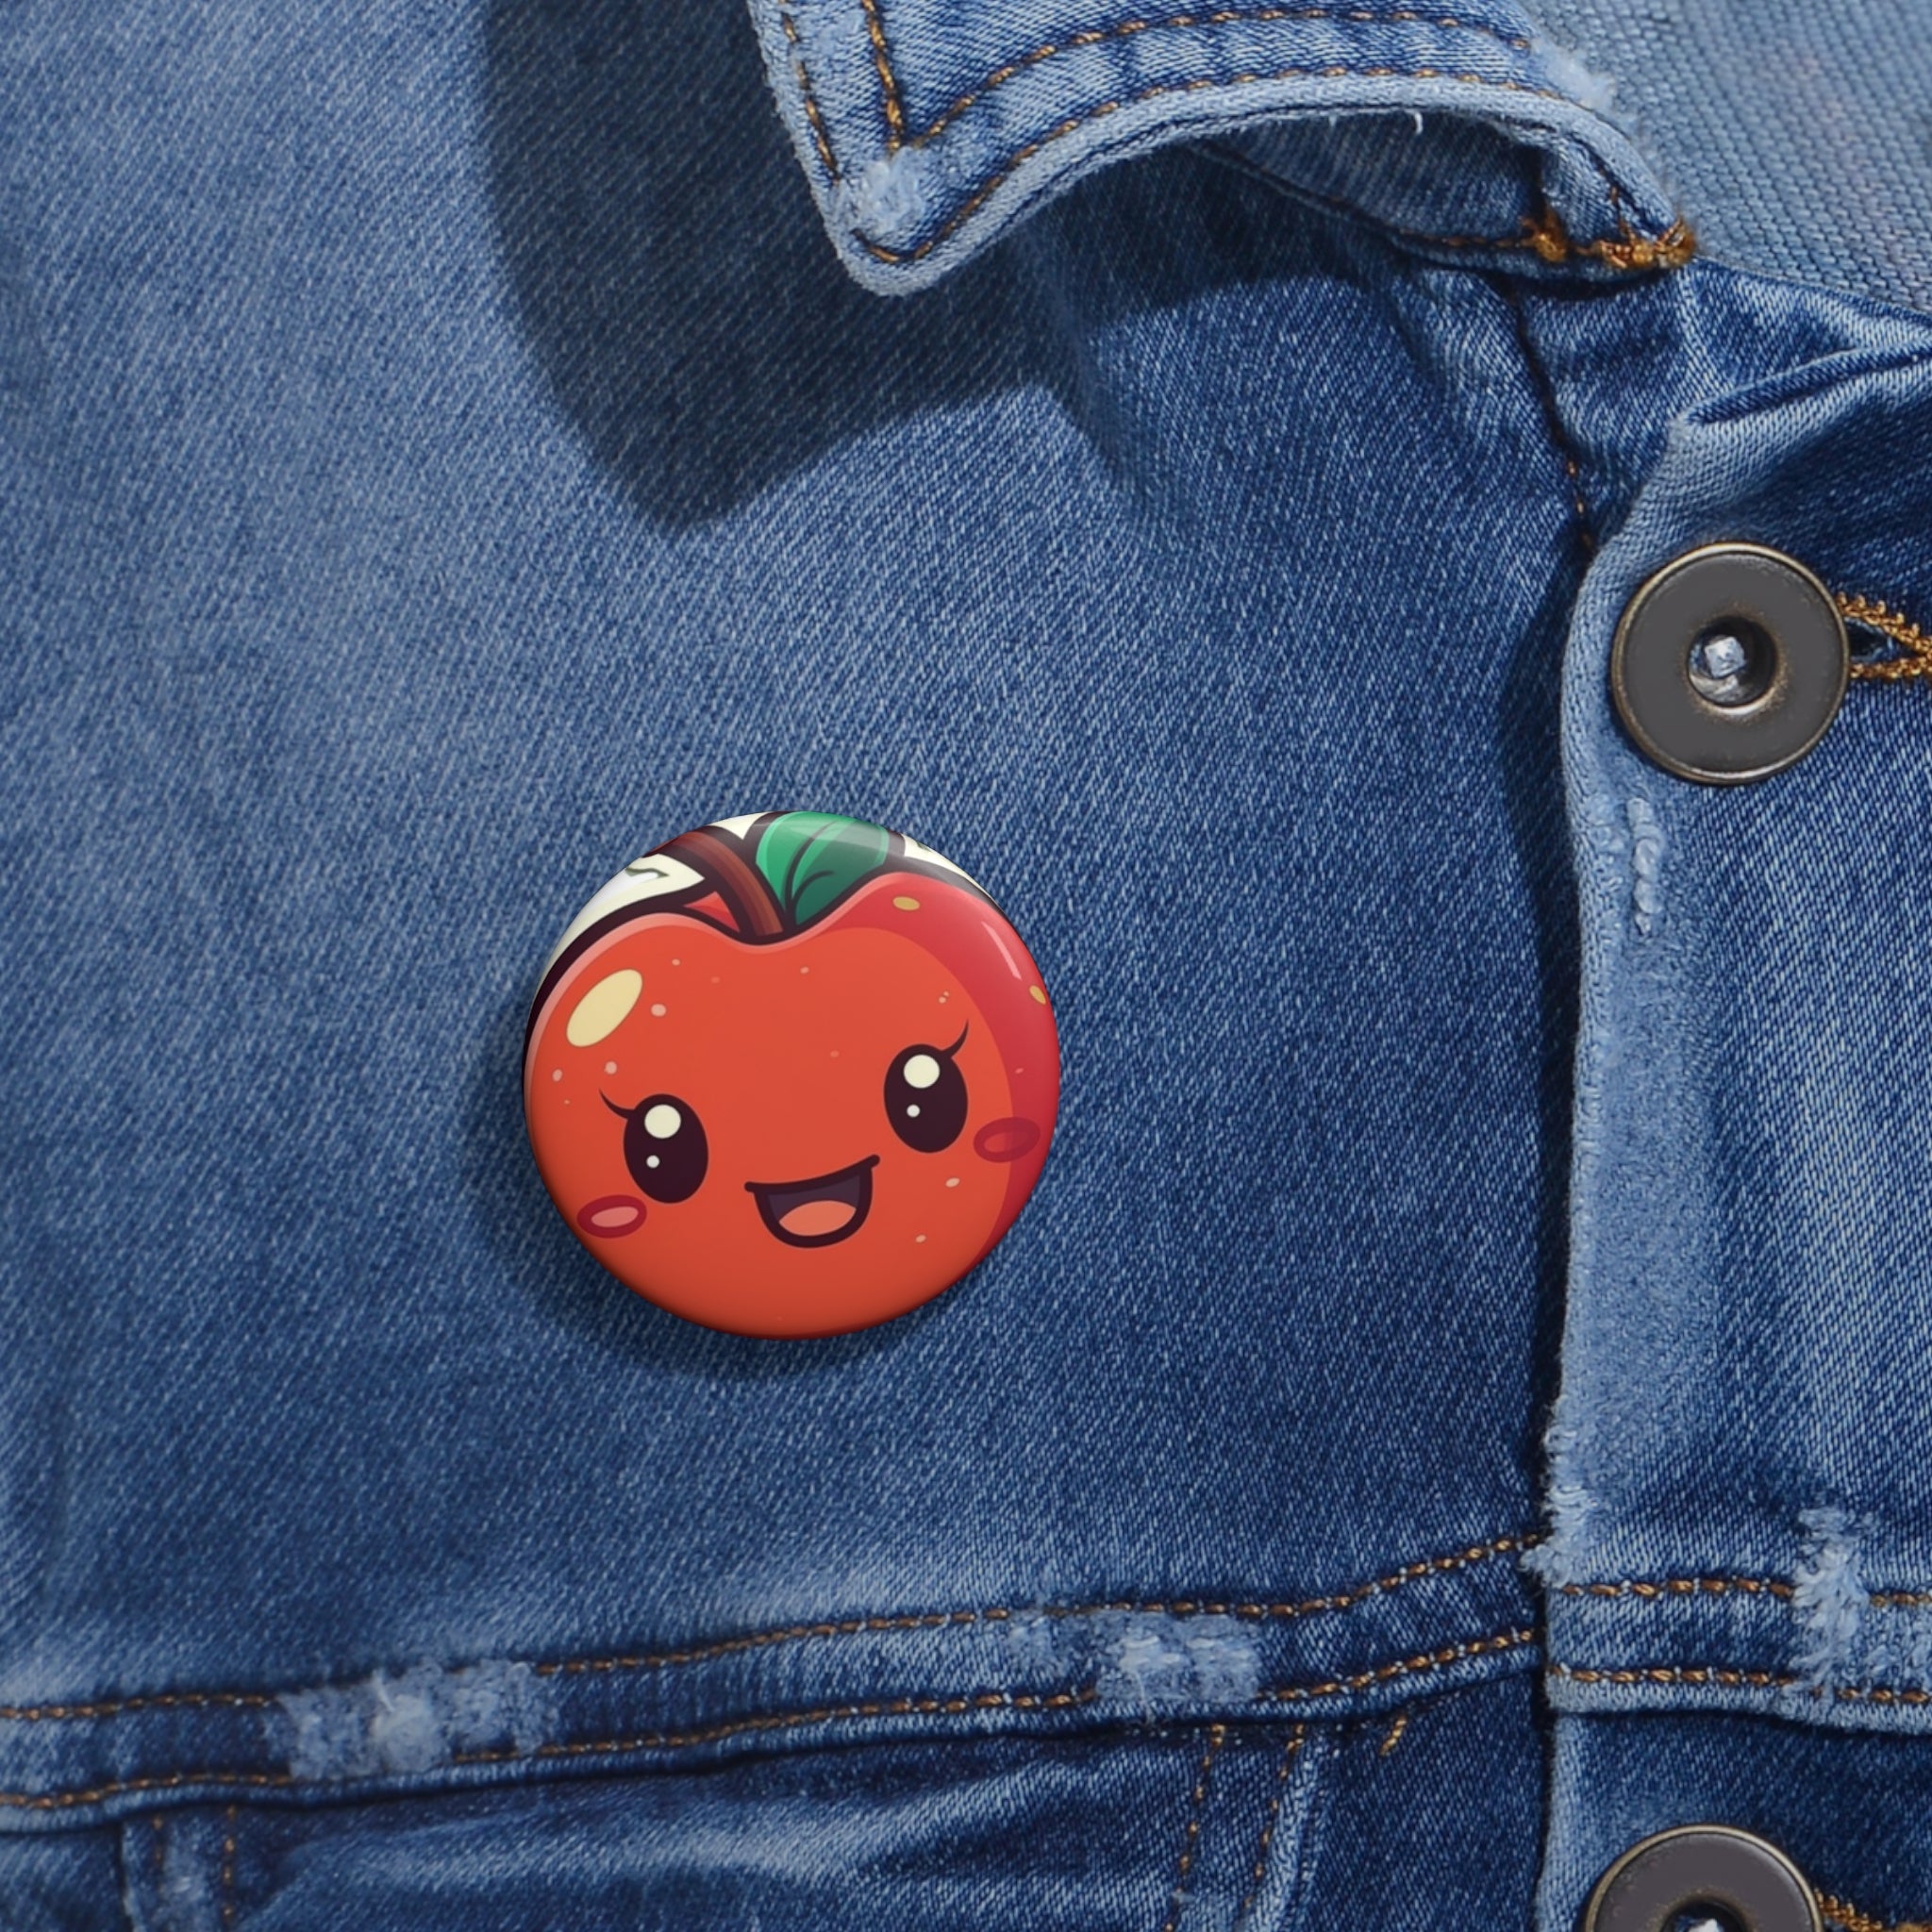 Custom Pin Buttons - Red Apple